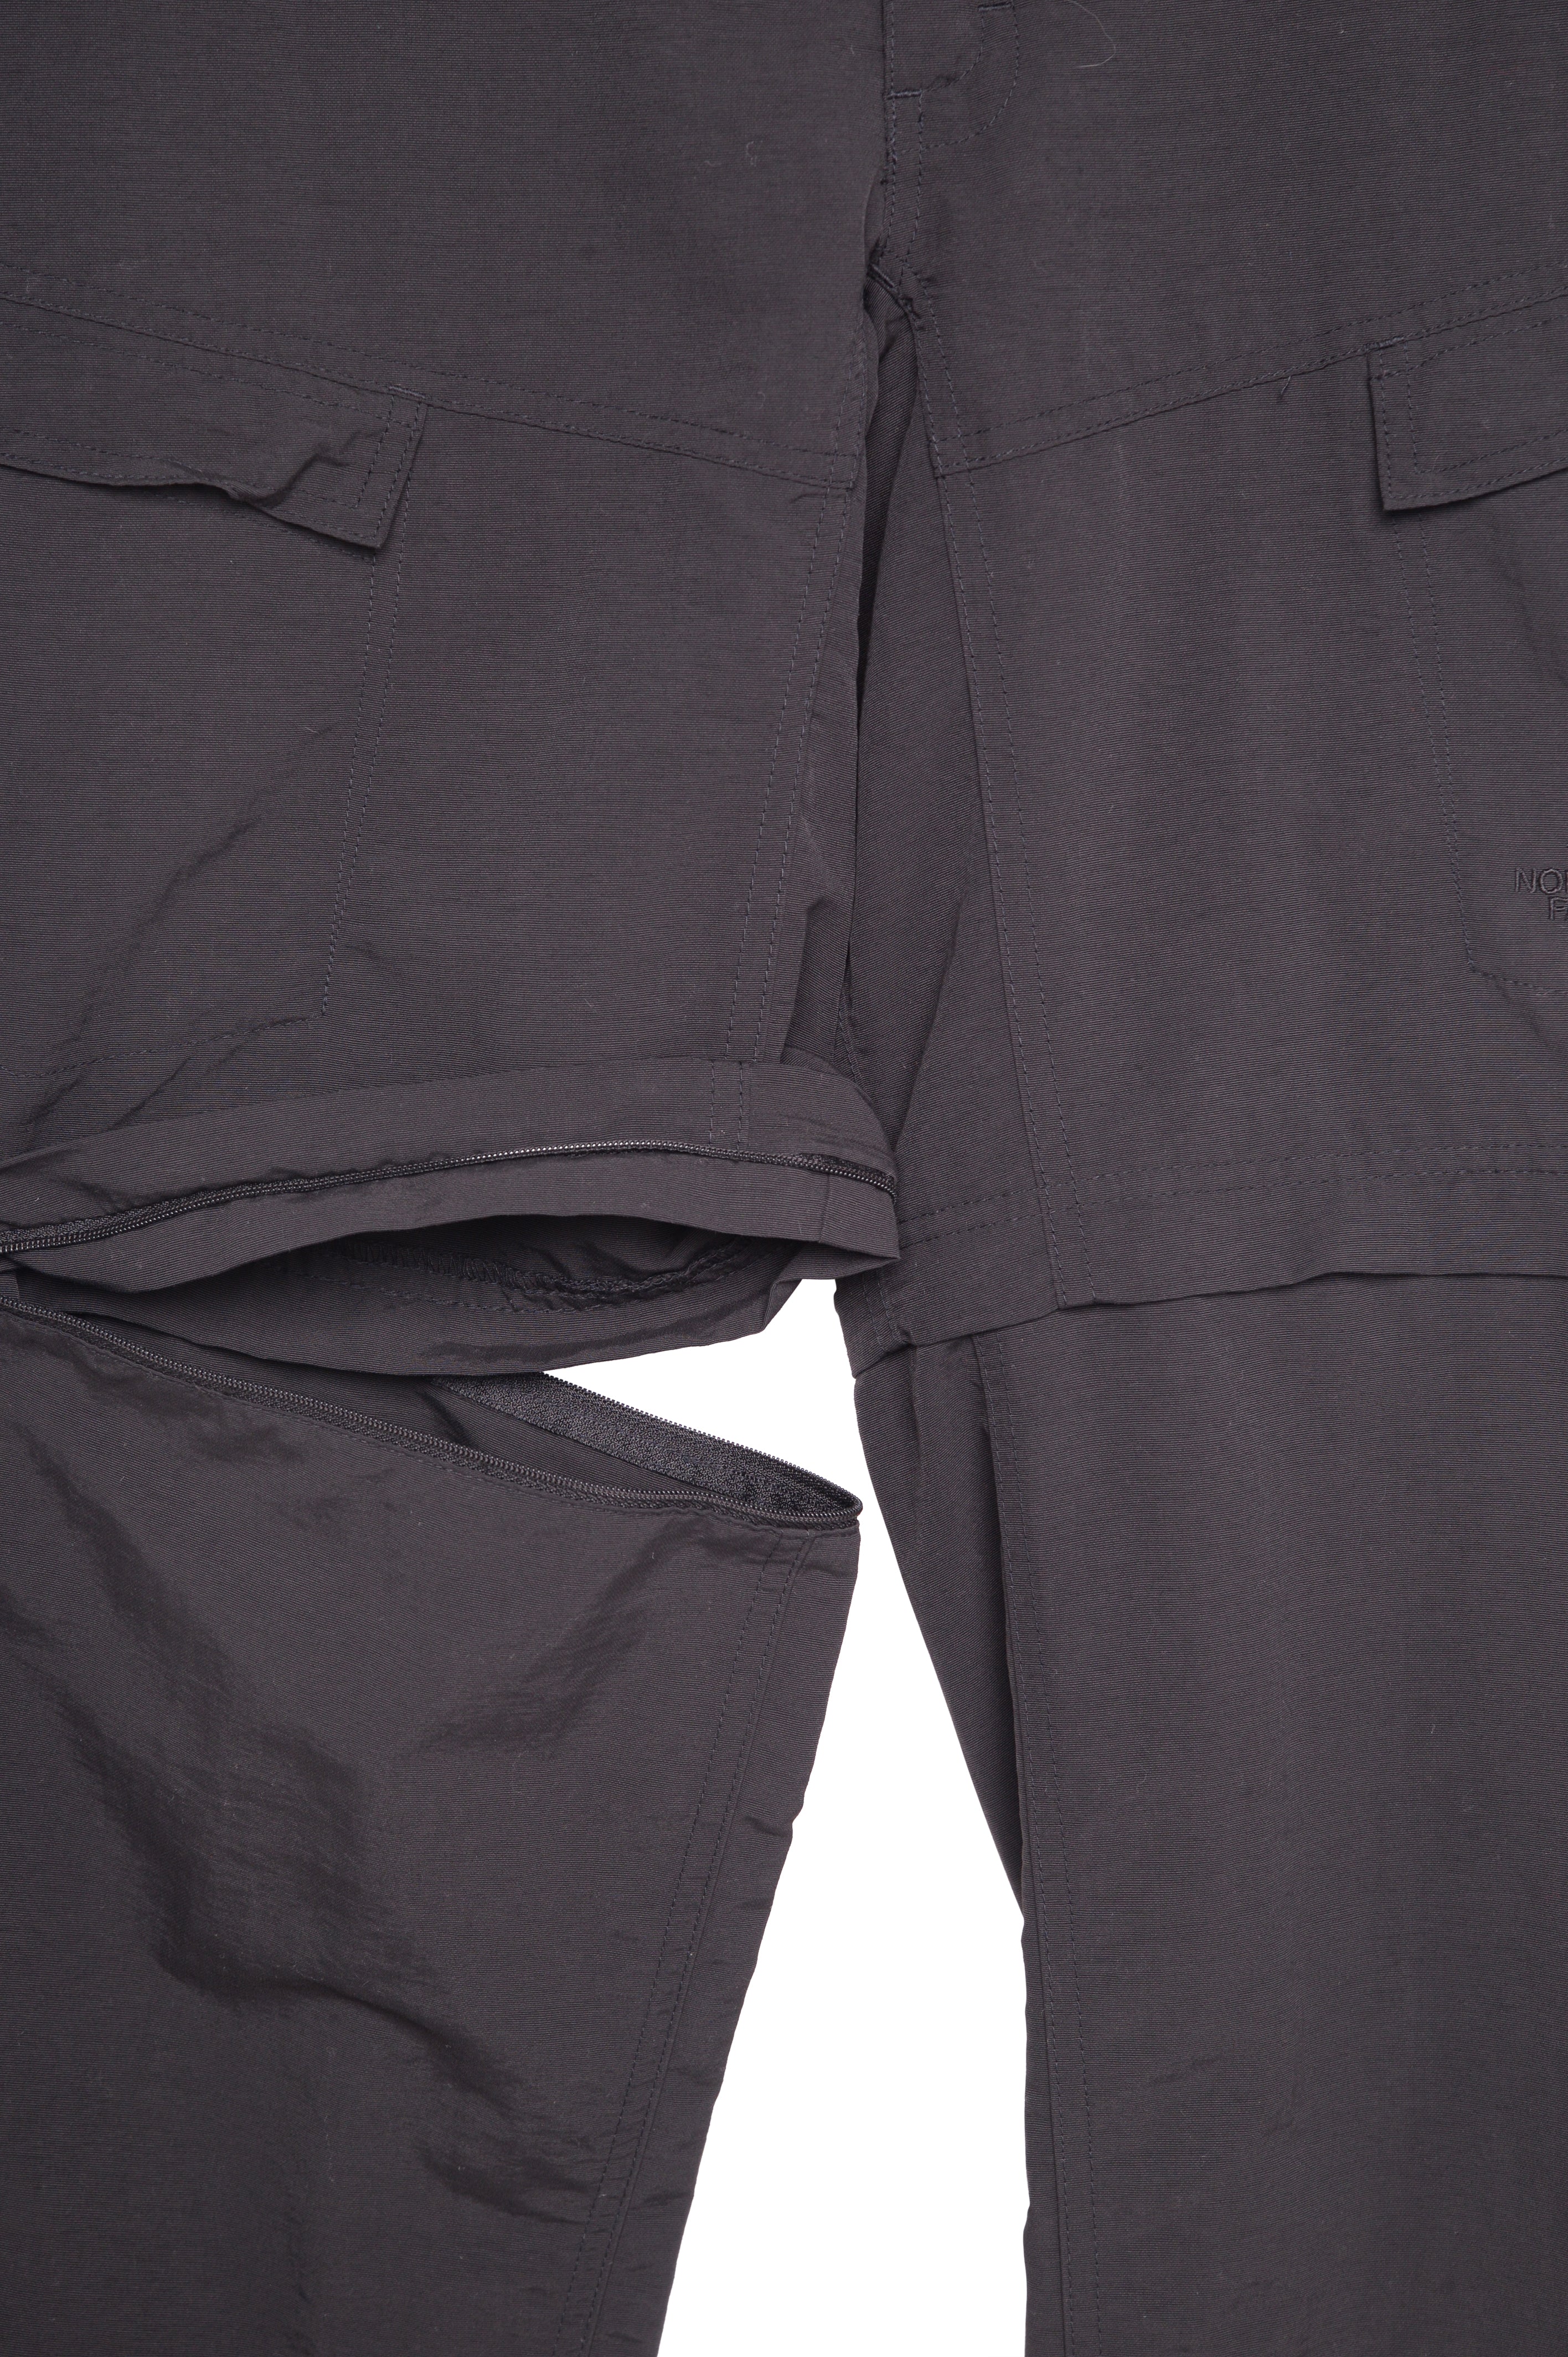 The North Face Mens Zip Off Pants Shorts L Gray Cargo Pockets with